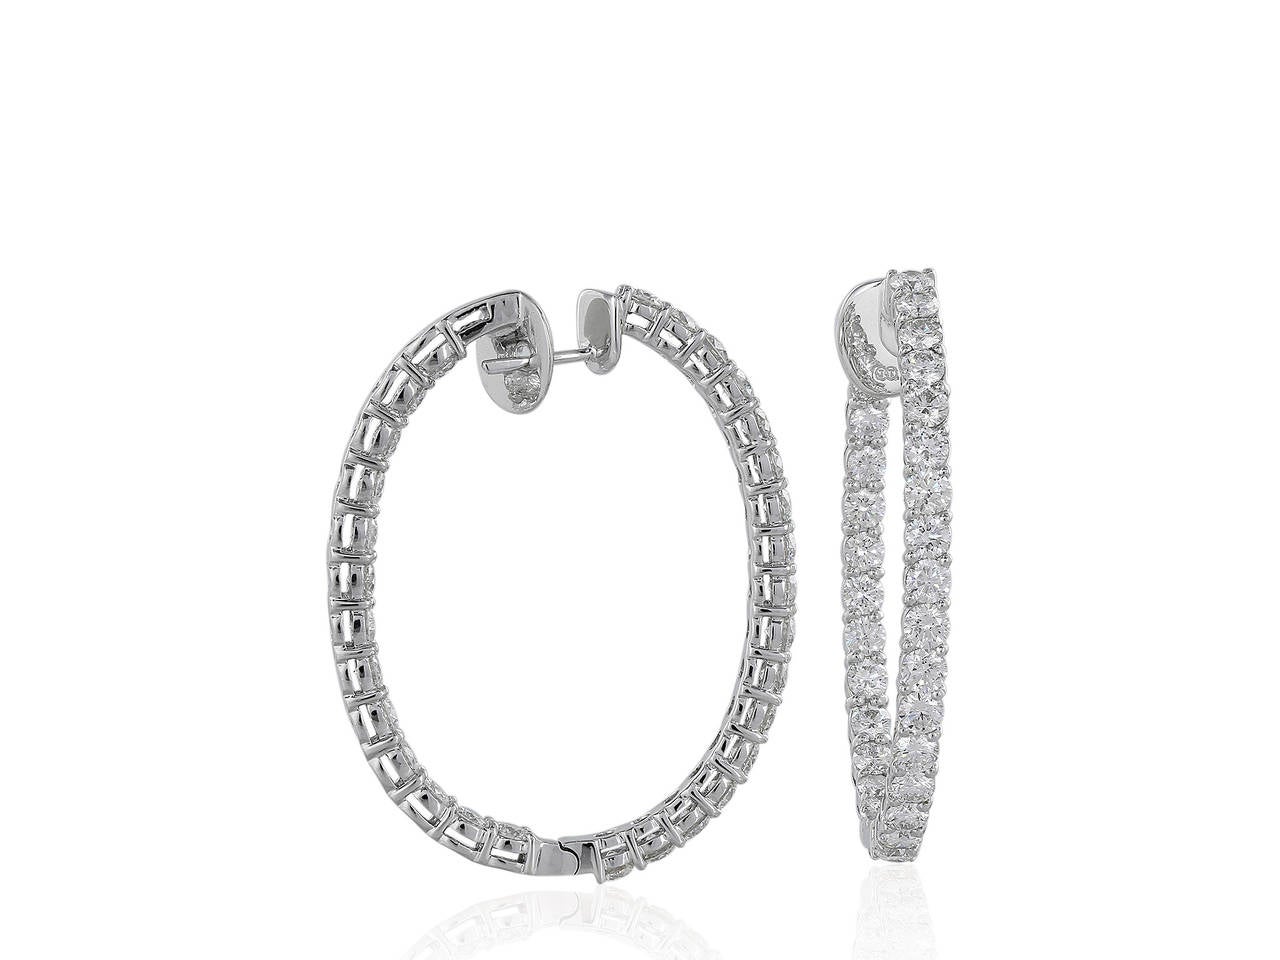 18 karat white gold oval shaped hoop earrings consisting of 60 round brilliant cut diamonds having a total weight of 8.05 carats.